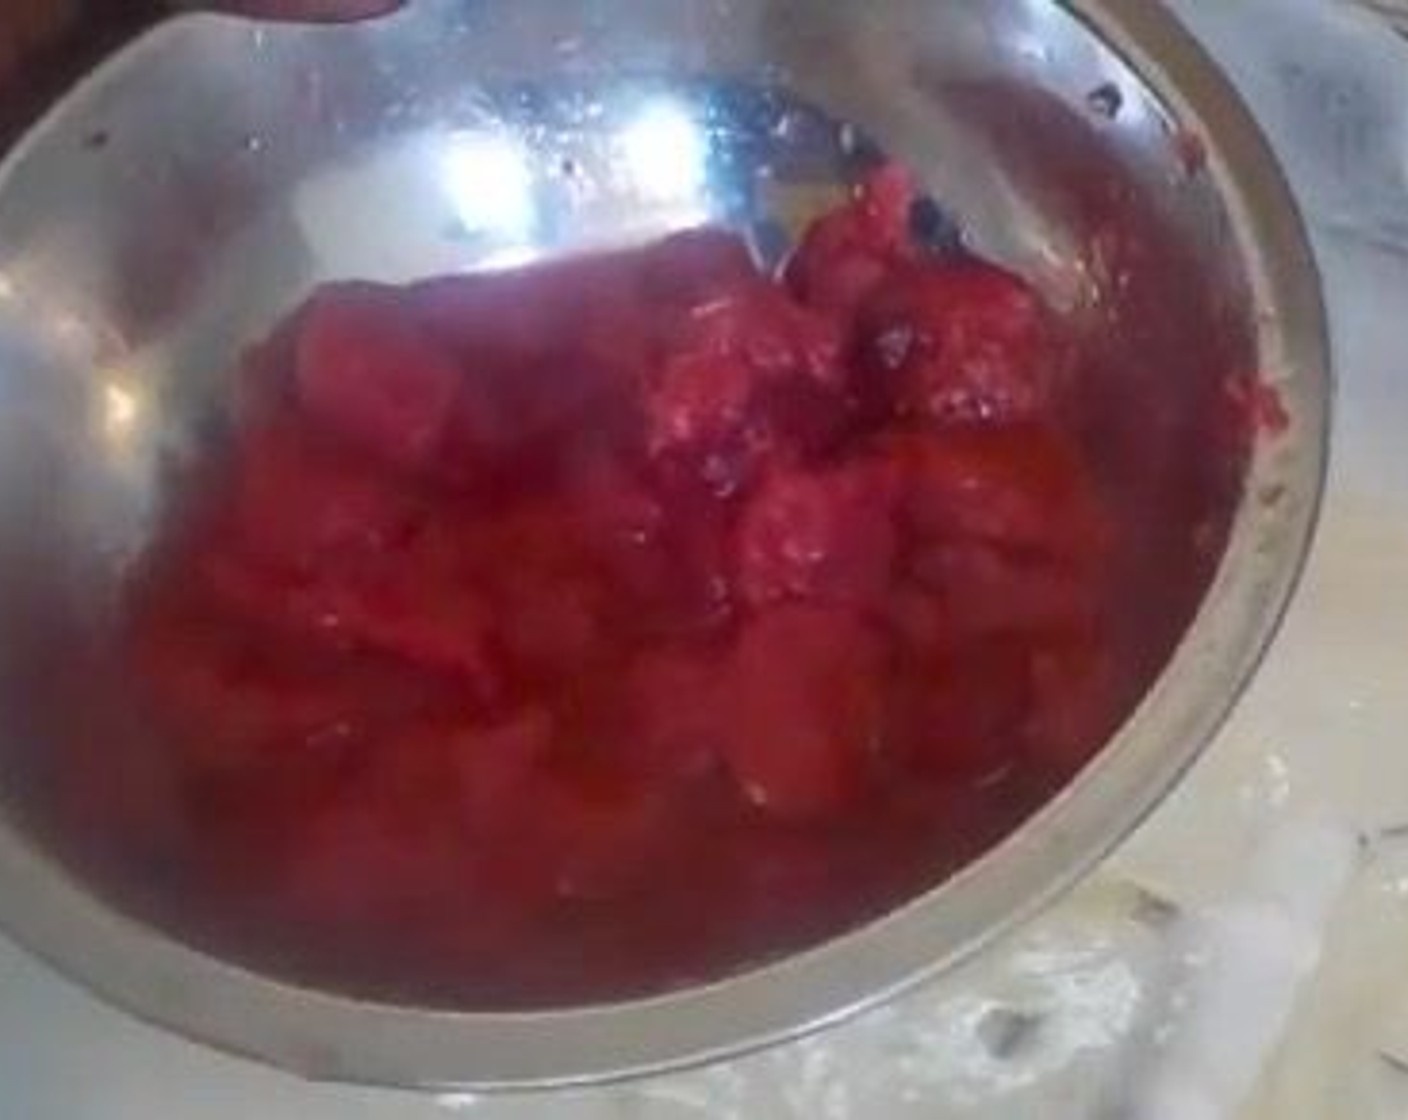 step 1 Into a bowl, add Fresh Strawberry (1/2 cup) and Granulated Sugar (1/4 tsp). Allow them to sit for 30 minutes as you work on the rest of the recipe.